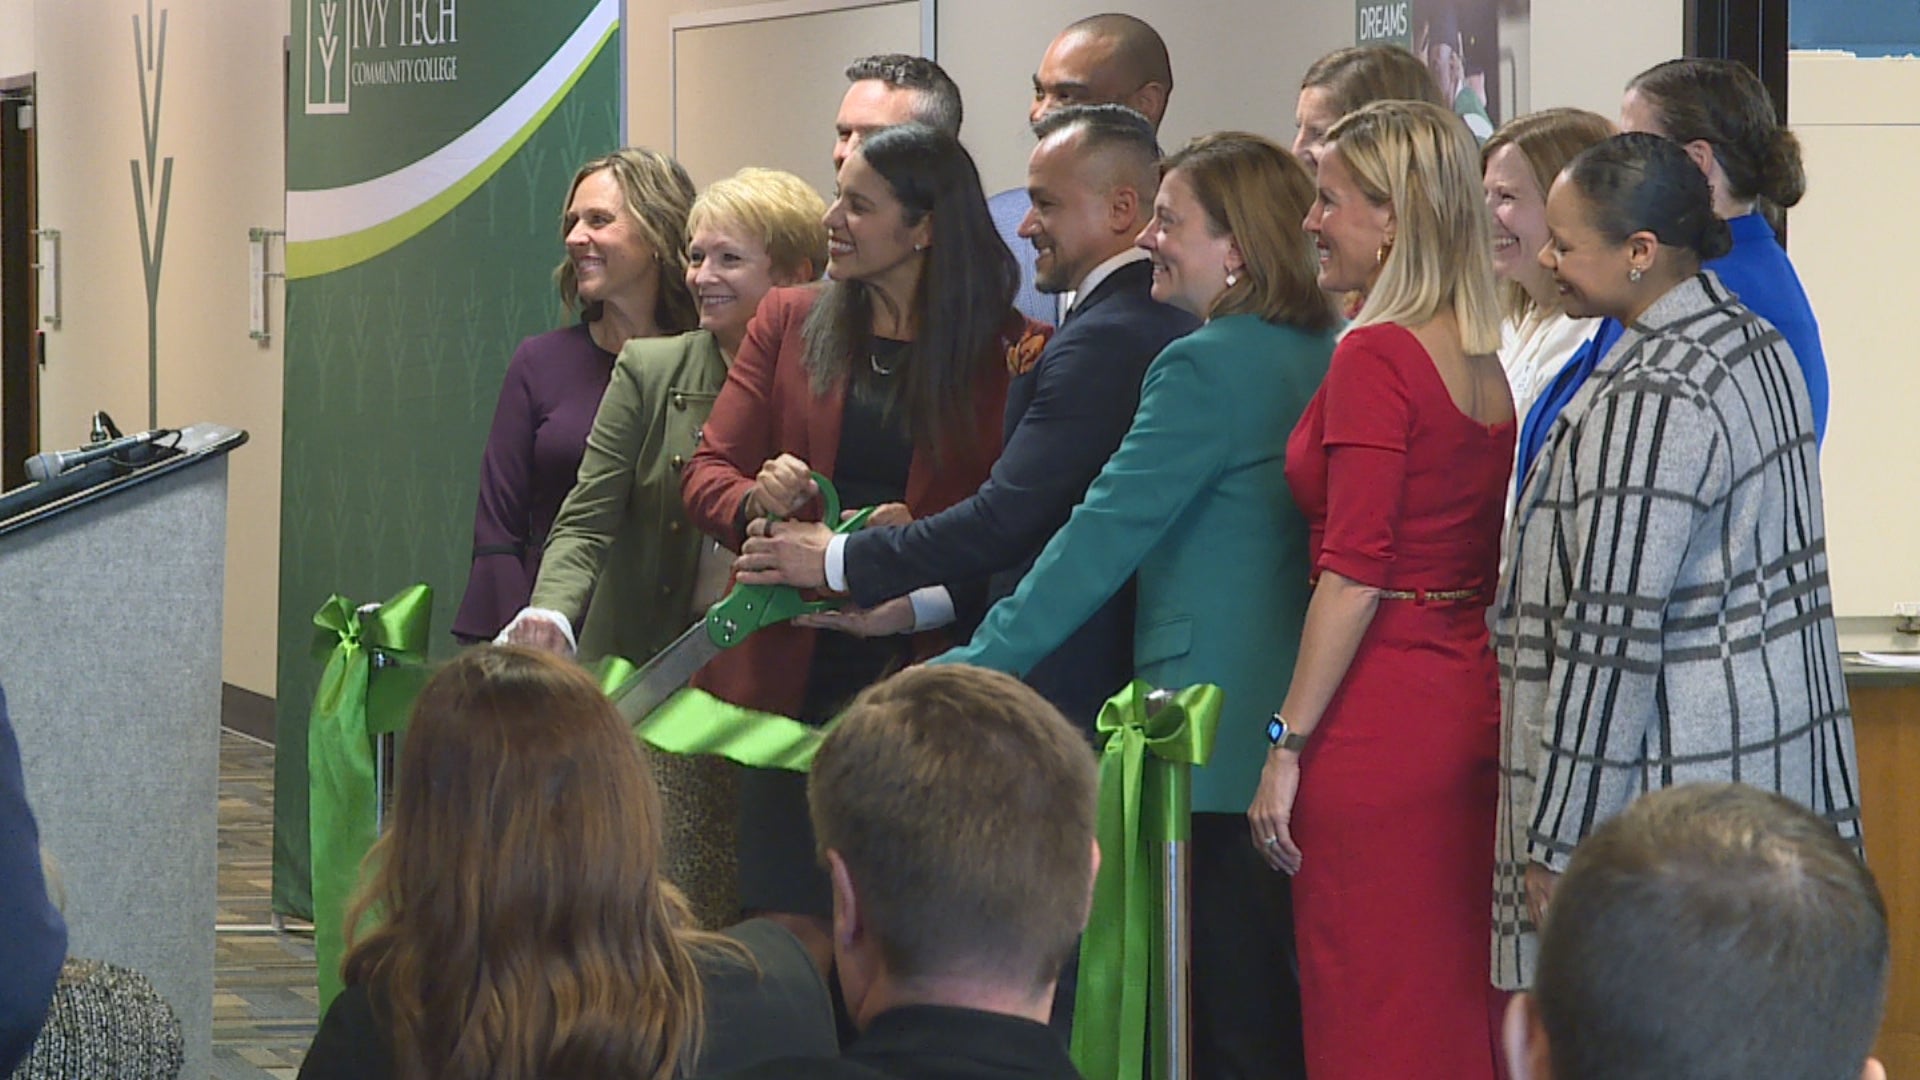 Ivy Tech opens Biopharma Science & Technology Lab in Indianapolis